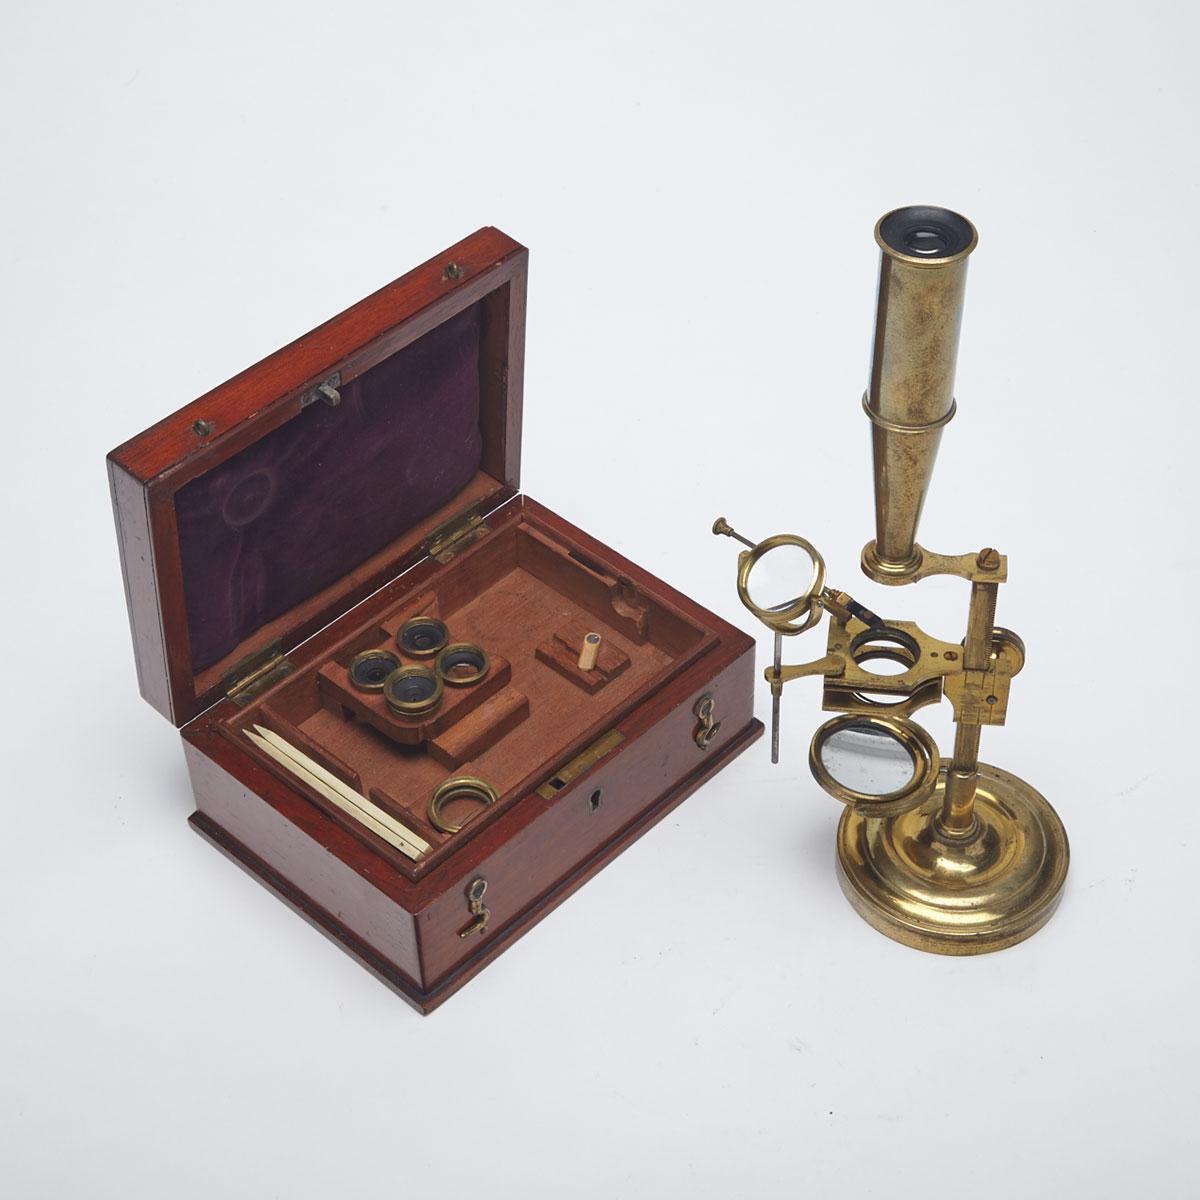 Lacquered Brass Gould Type Compound Monocular Field Microscope, Carpenter & Westley, London, c.1840